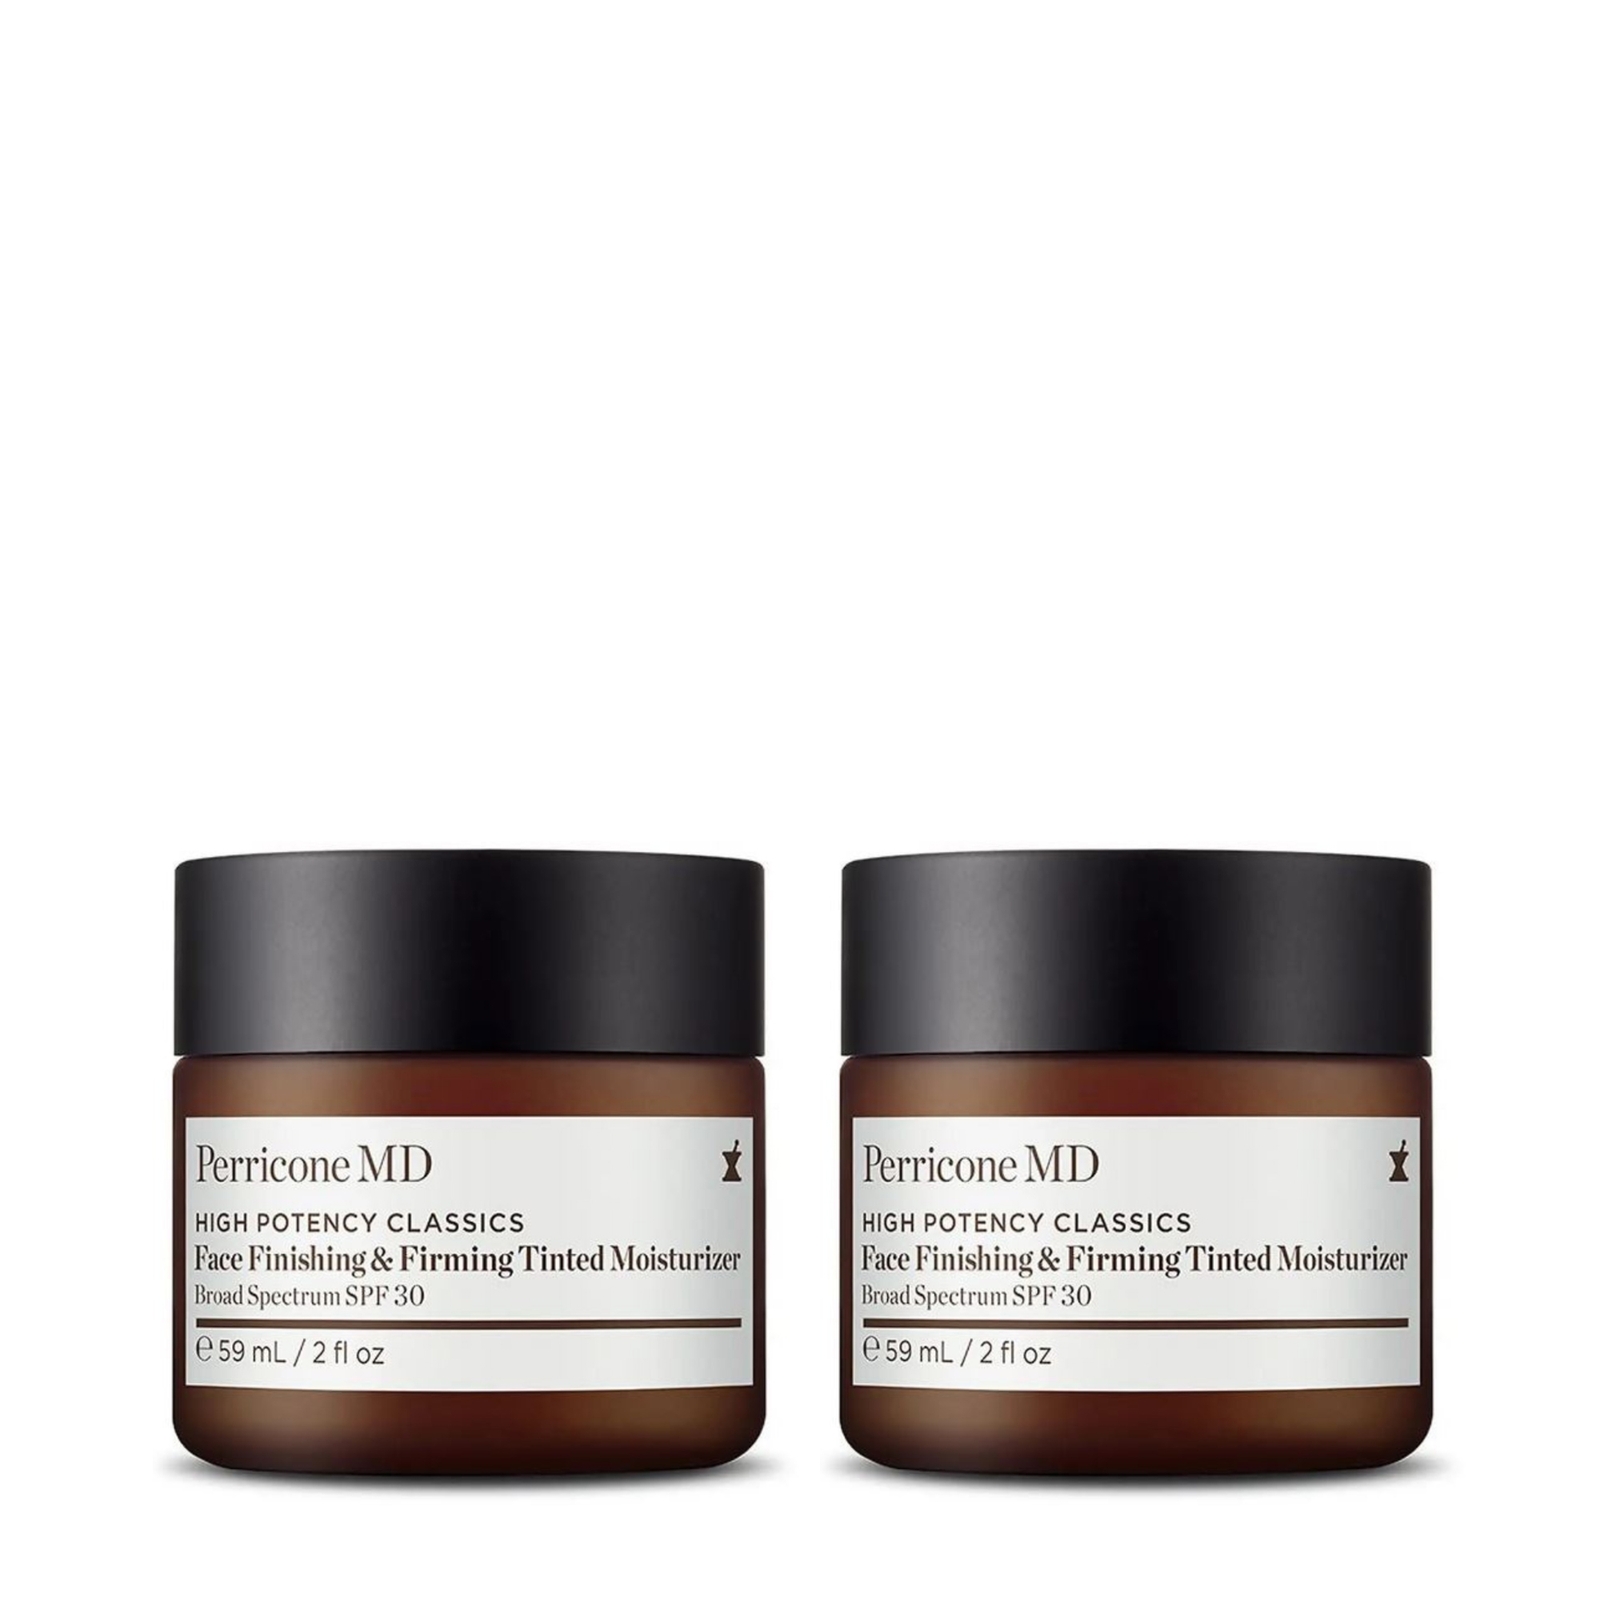 Perricone Md High Potency Face Finishing & Firming Tinted Moisturiser Spf 30 Duo In White